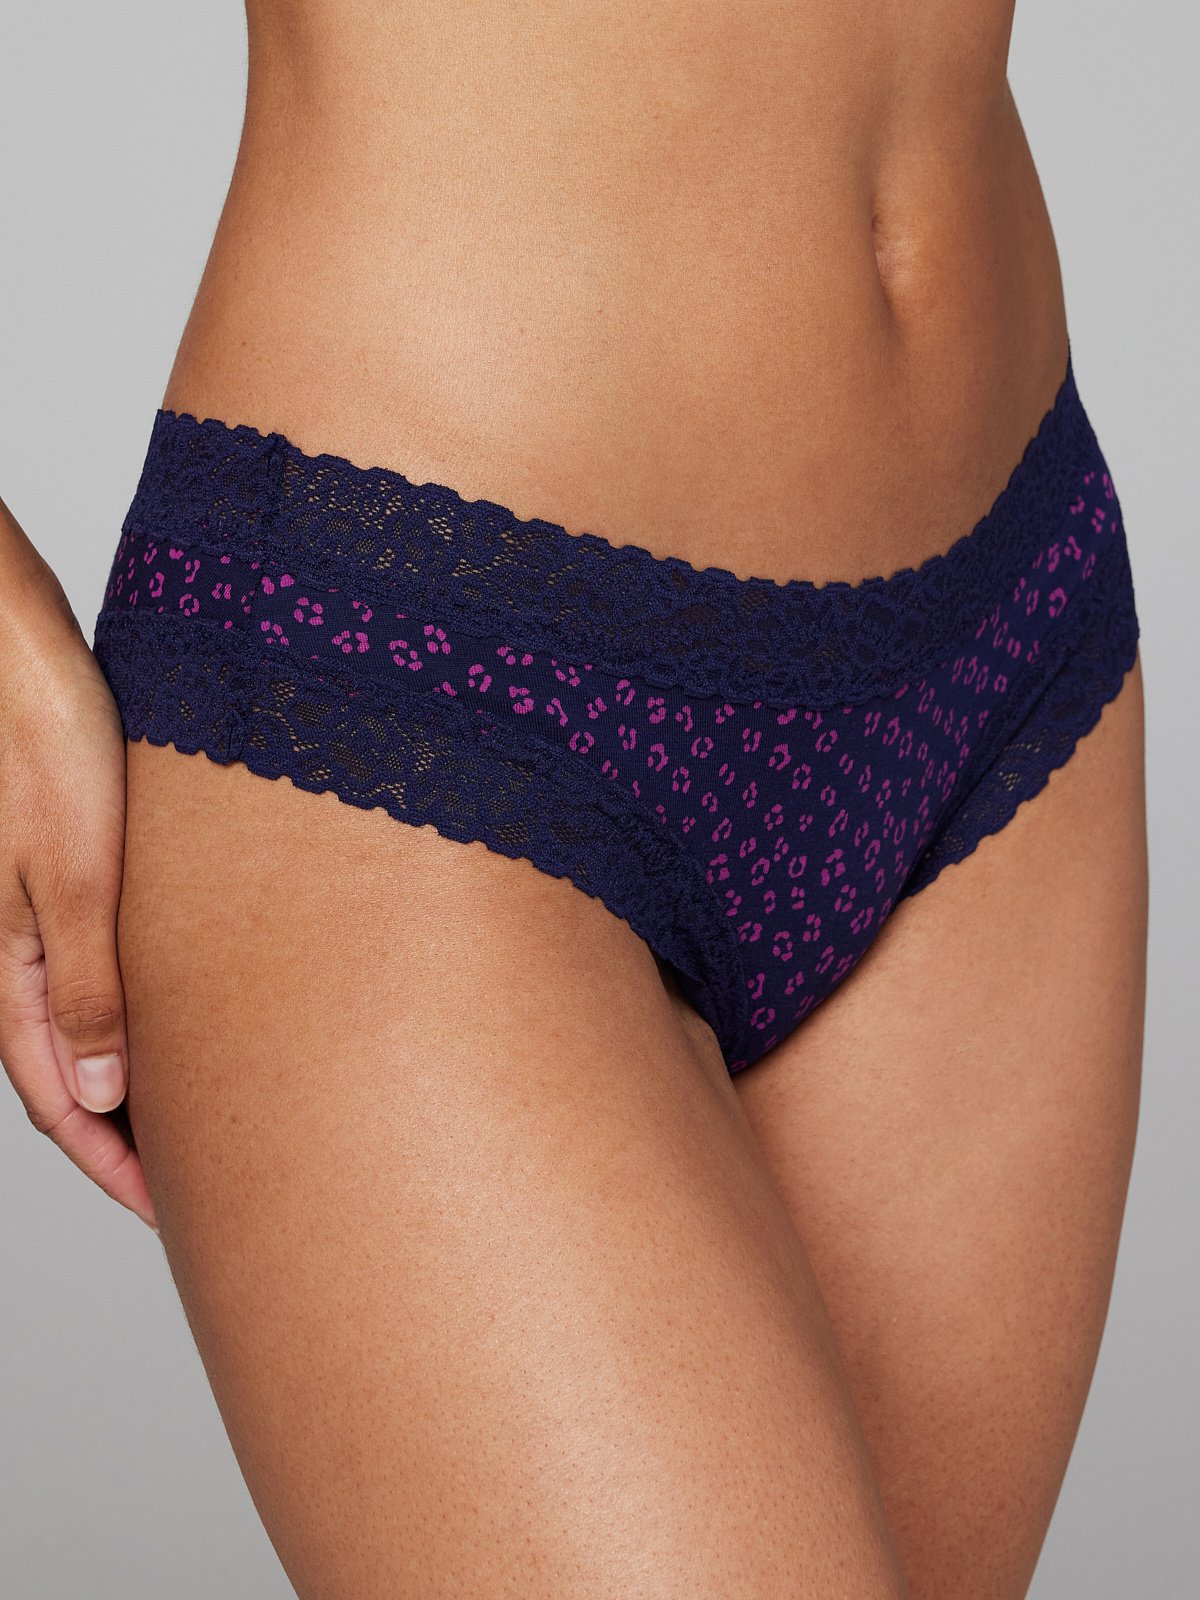 https://cdn.savagex.com/media/images/products/UD2042663-8217/COTTON-ESSENTIALS-LACE-TRIM-CHEEKY-PANTY-UD2042663-8217-1-1200x1600.jpg